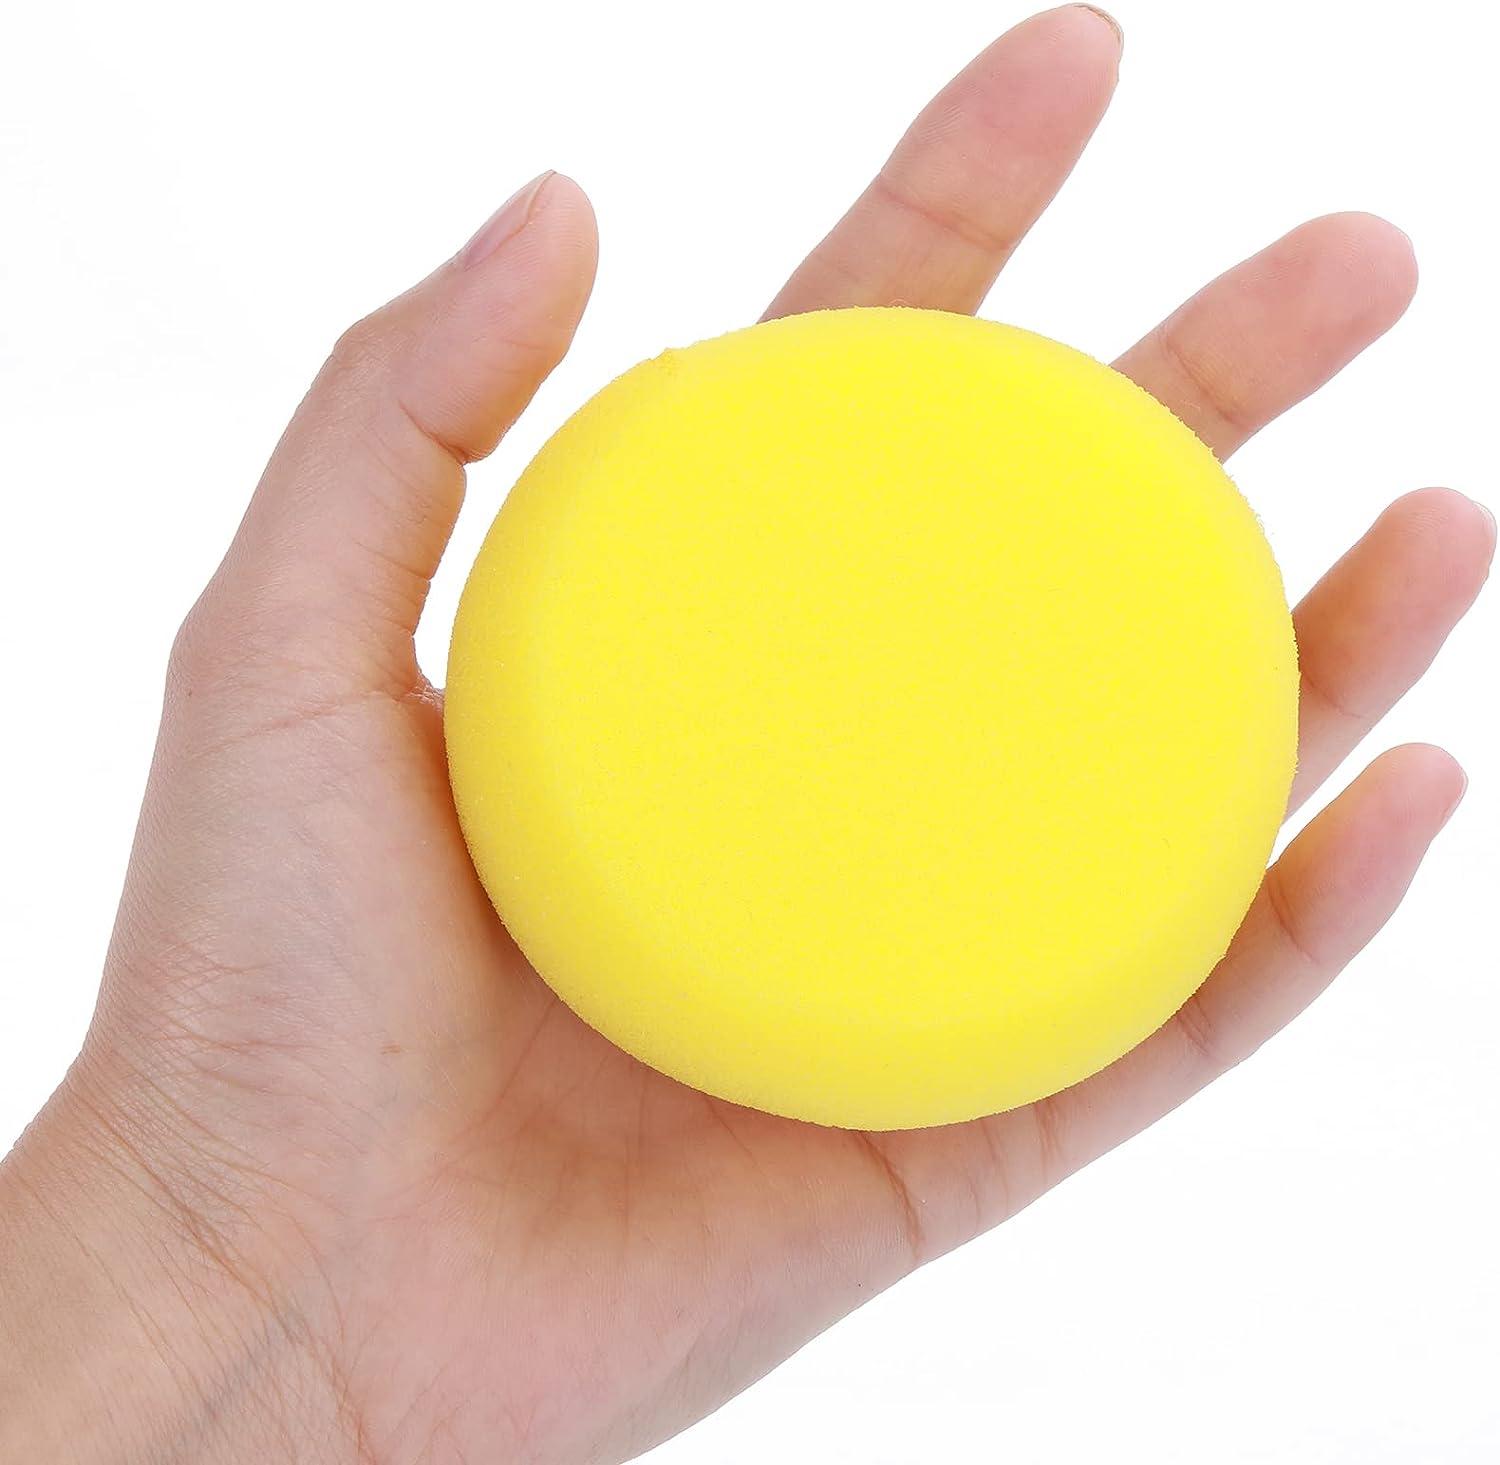 12 Pcs Yellow Round Painting Sponges Synthetic Artist Sponges Face